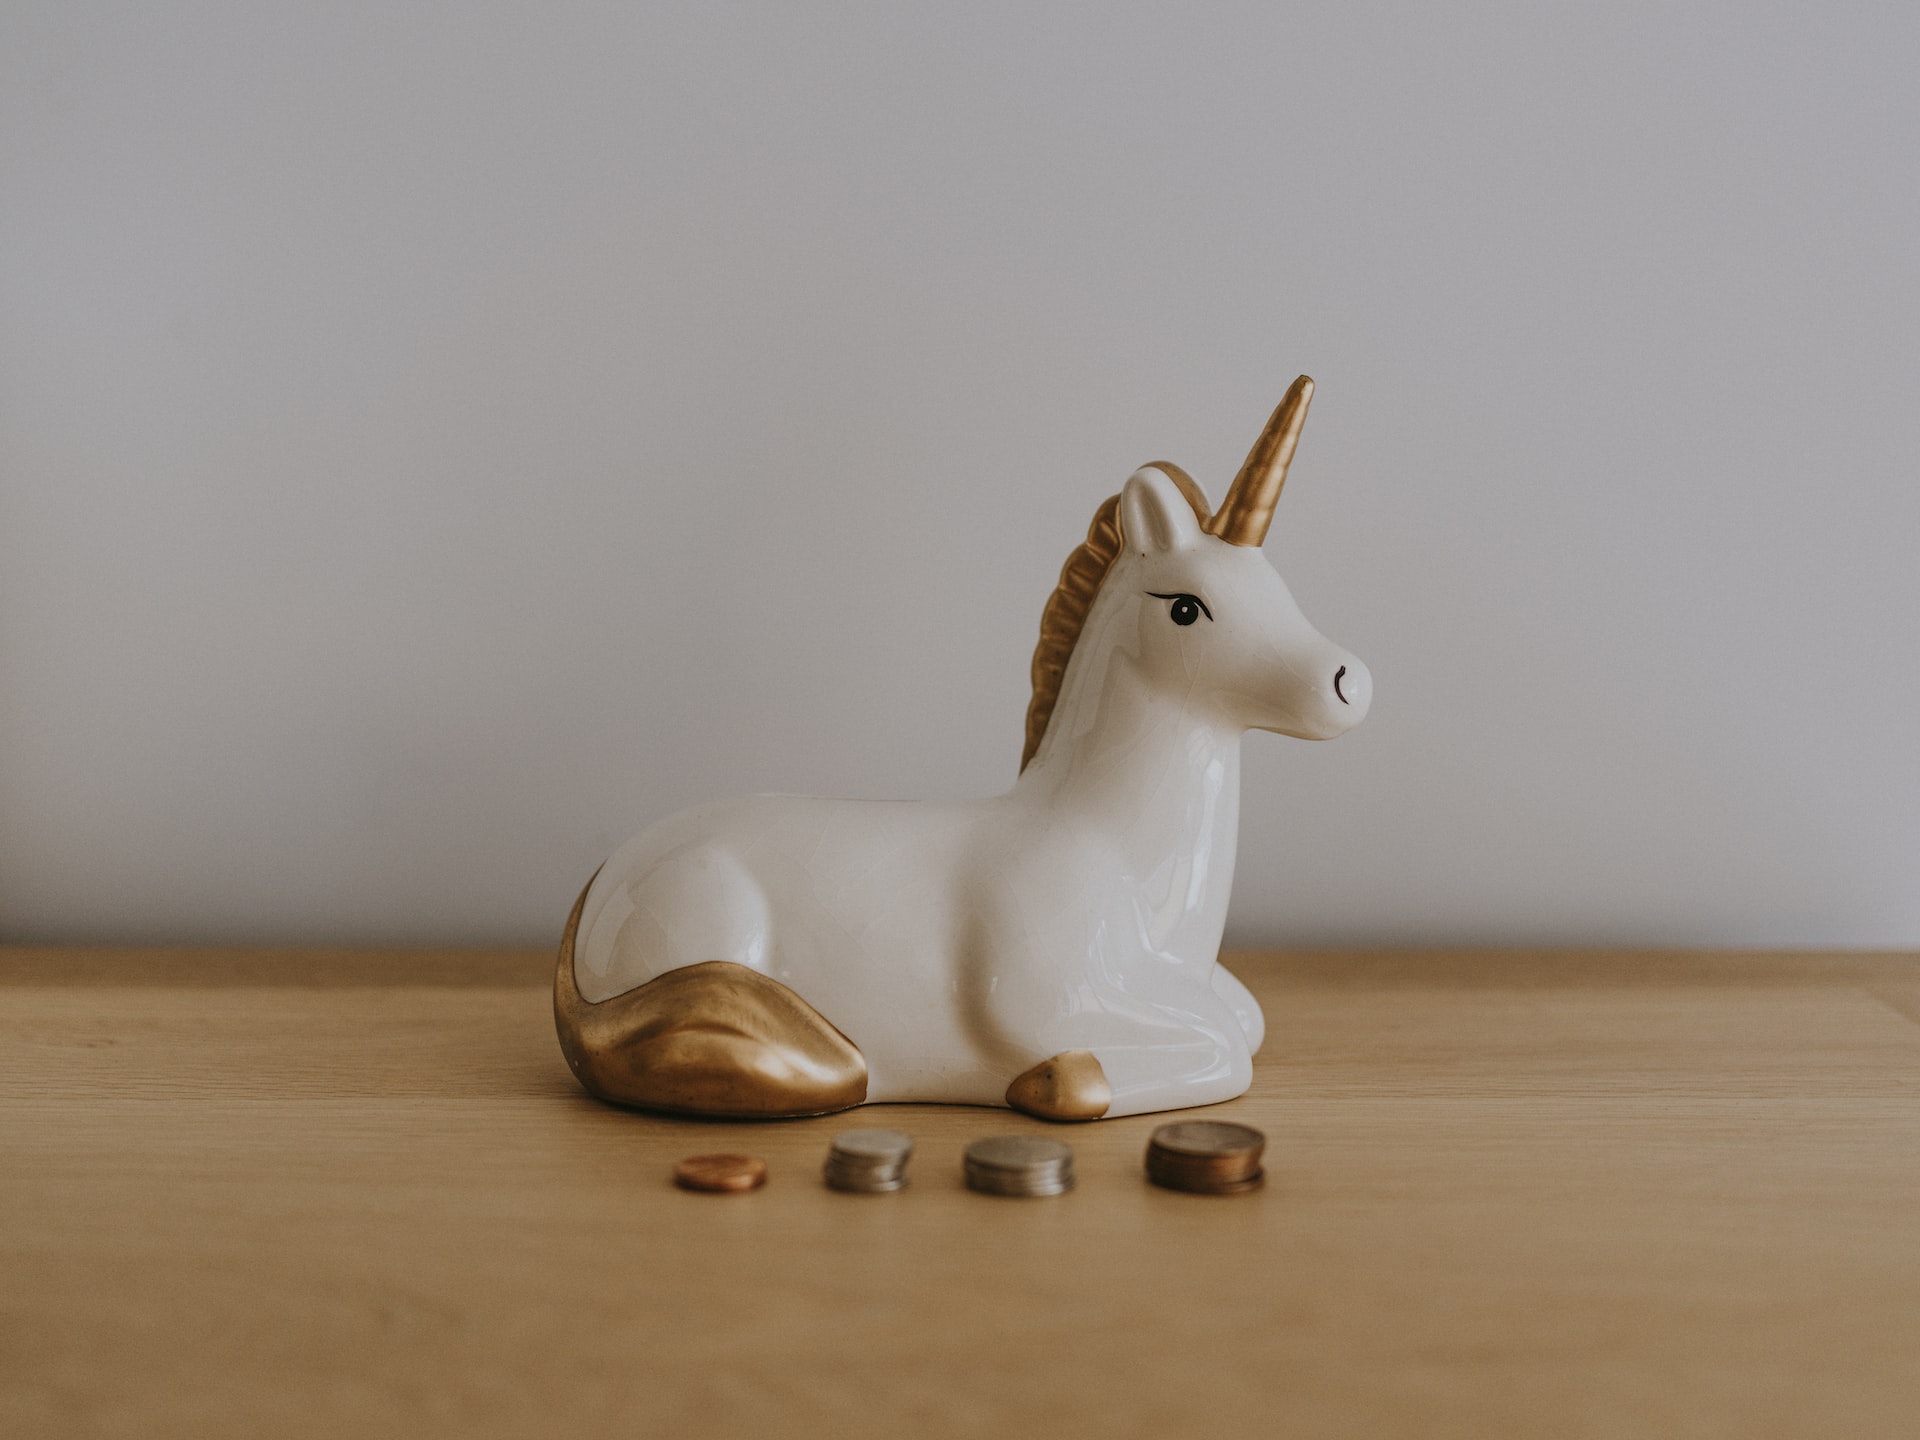 A ceramic unicorn sitting on a desk in front of stacks of coins.